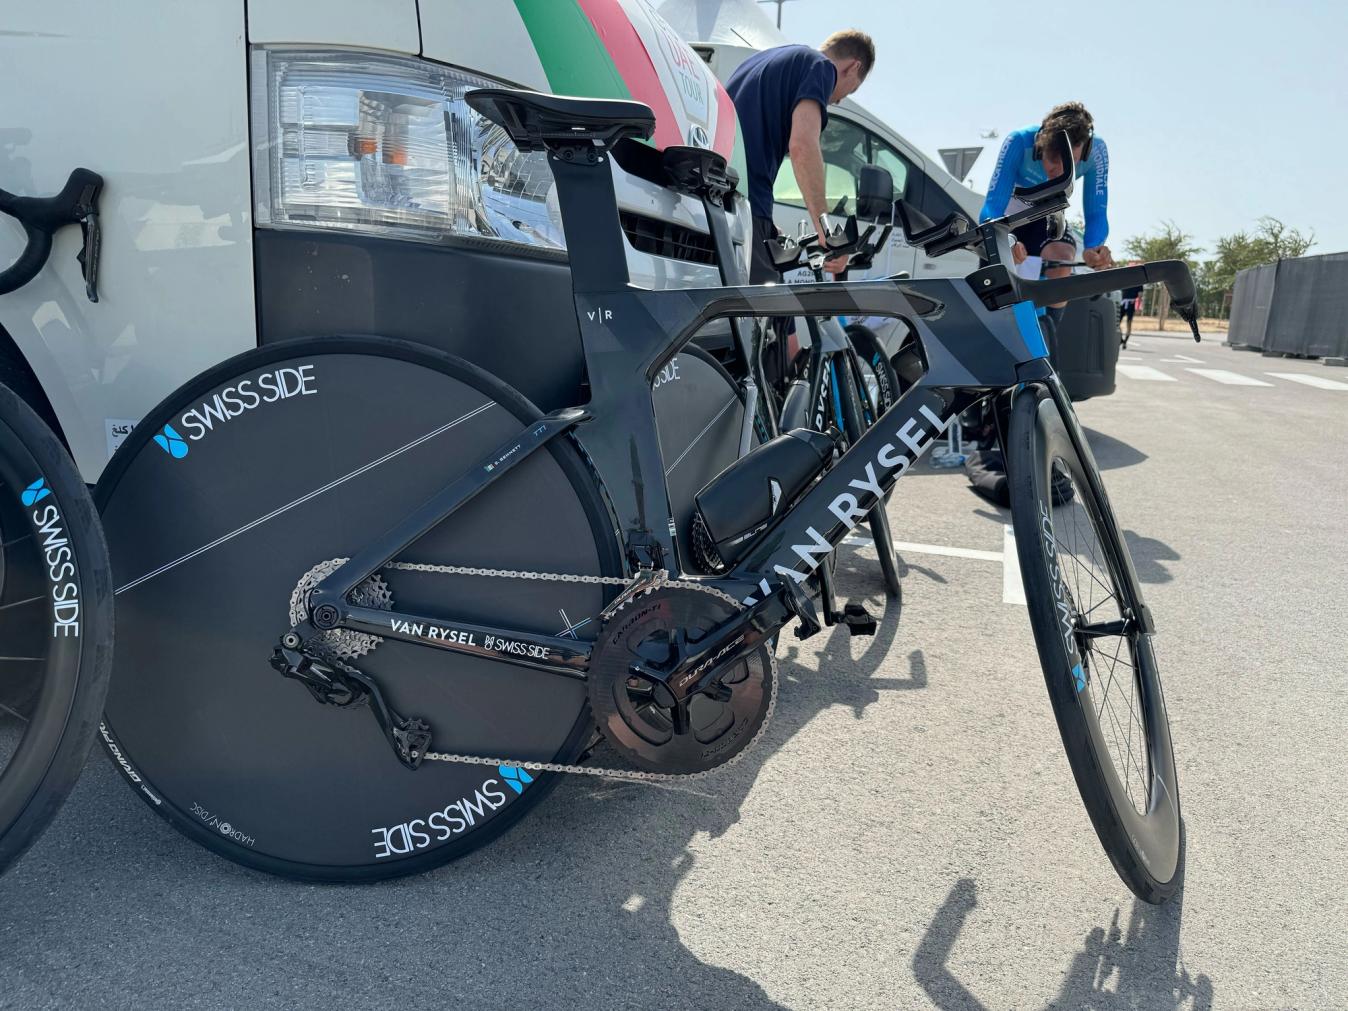 Decathlon-owned Van Rysel jumped aboard as bike sponsors at Decathlon-AG2R La Mondiale, bringing a brand new range of bikes along with it